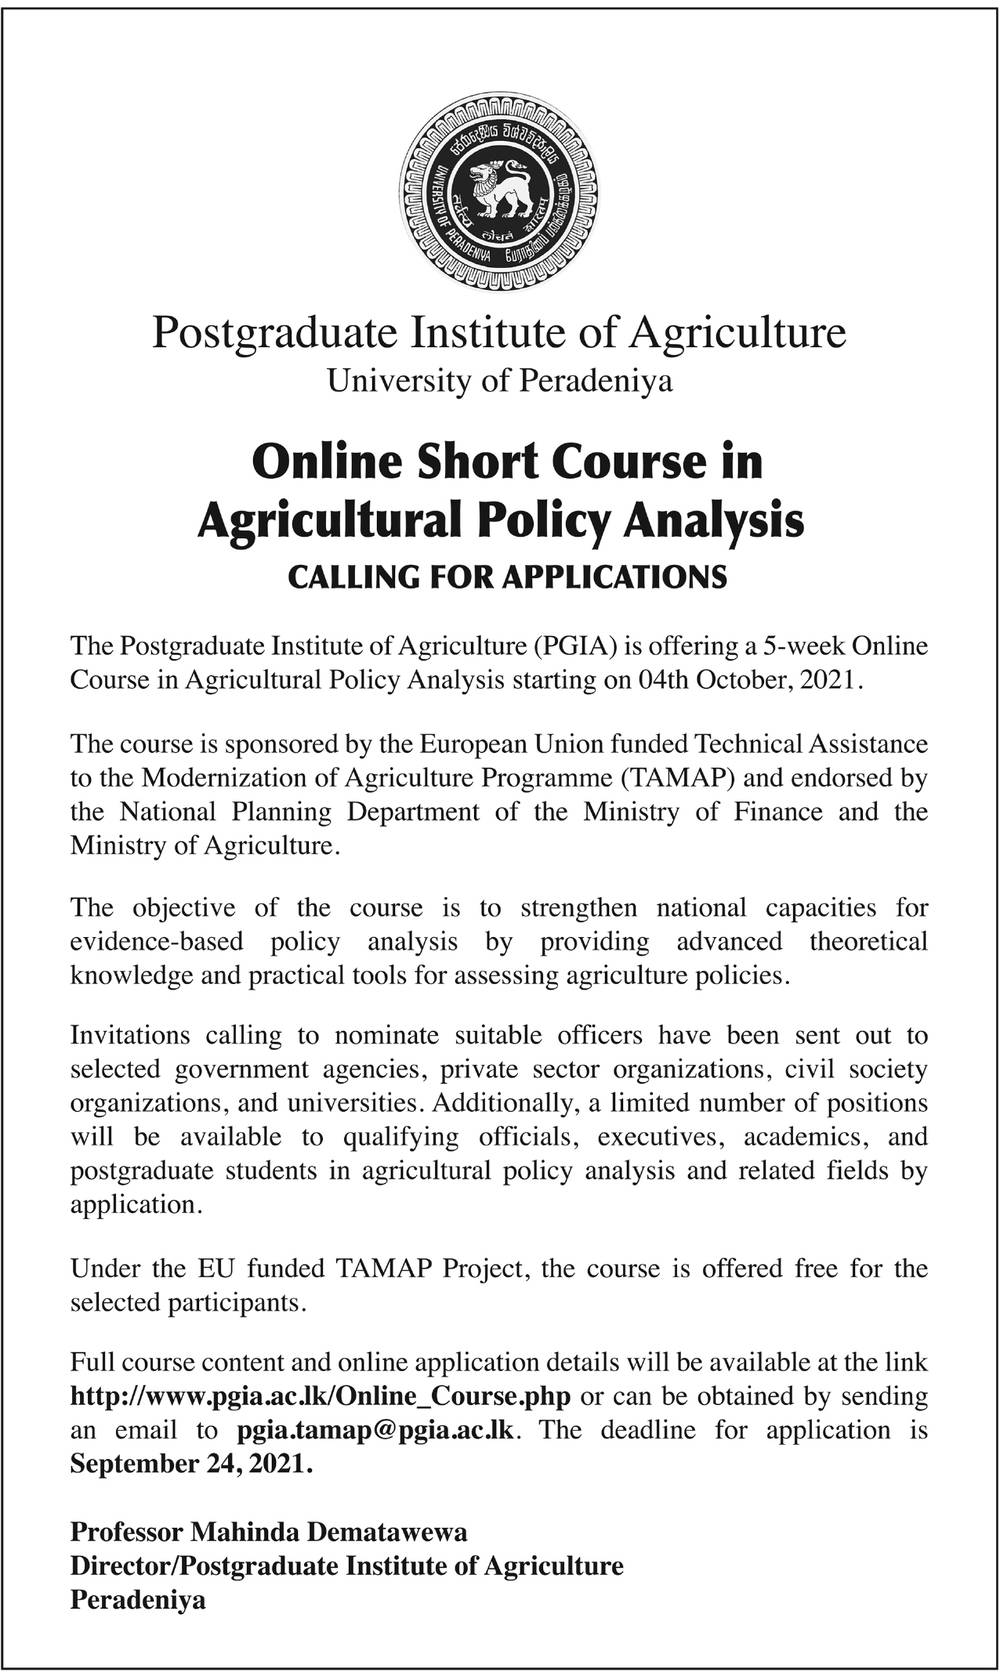 Online Course in Agricultural Policy Analysis 2021 - University of Peradeniya